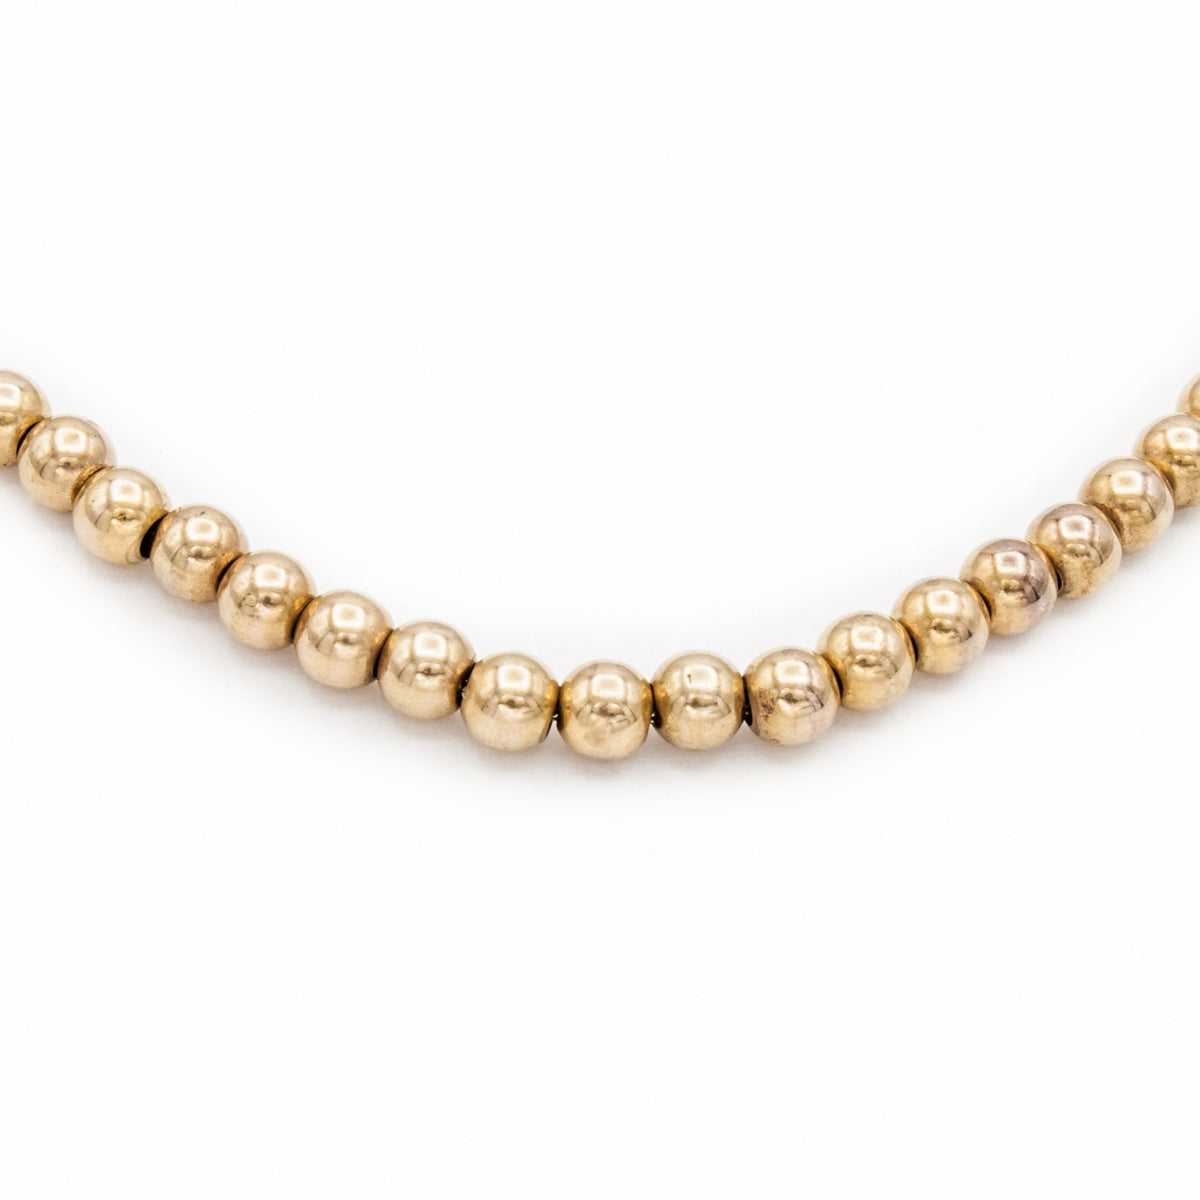 Beaded Chain Necklace in Gold